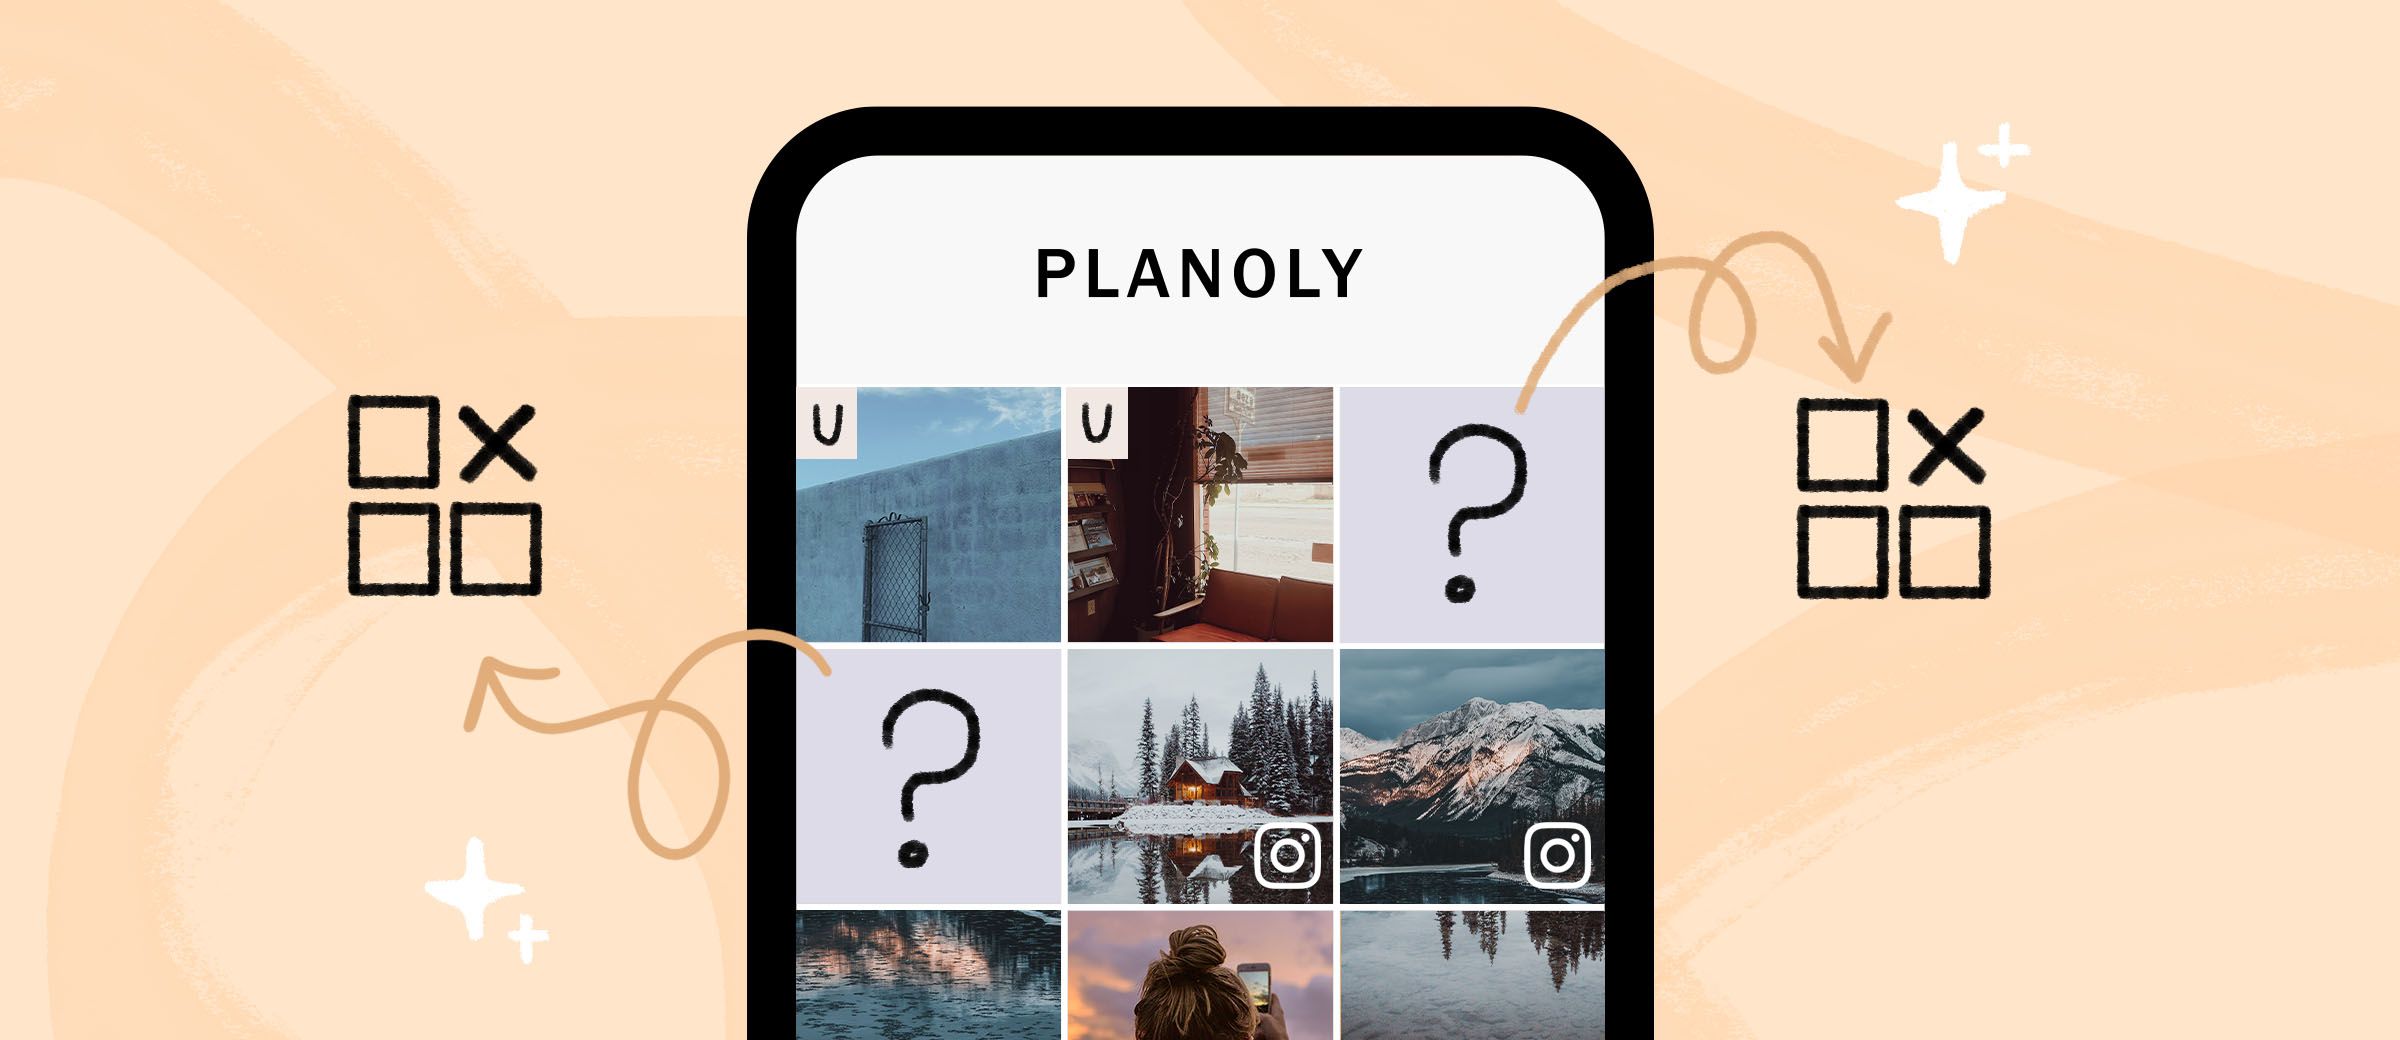 How to Import Missing Content to PLANOLY